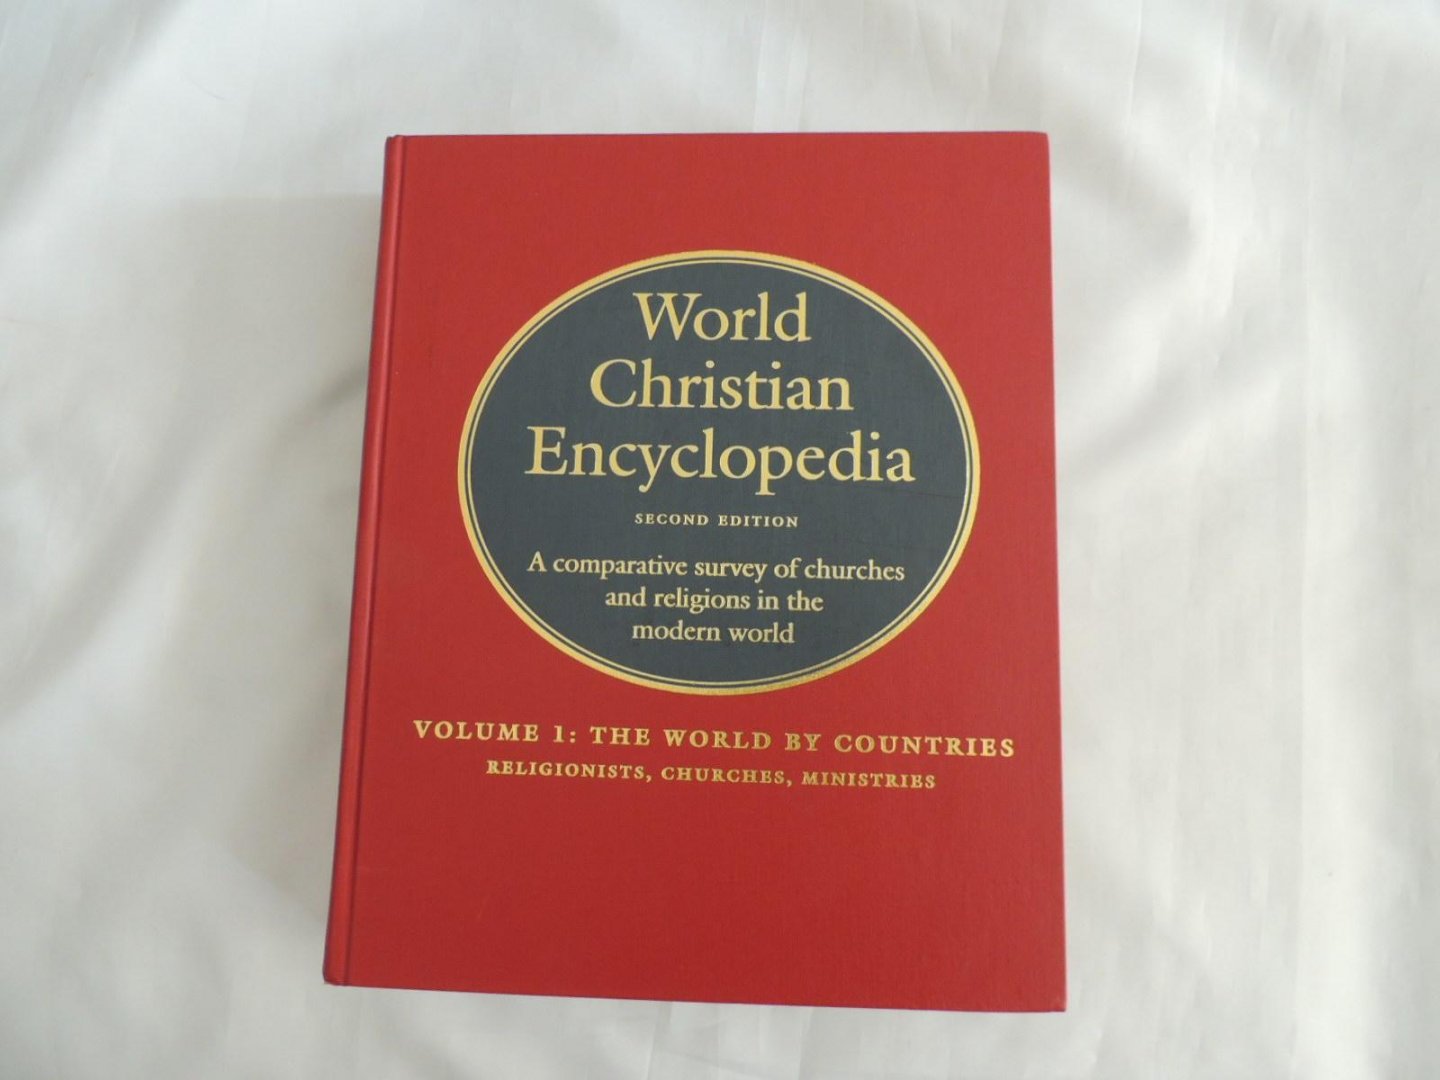 David B Barrett; - World Christian Encyclopedia - a comparative survey of churches and religions in the modern world --- in 2 VOLUMES